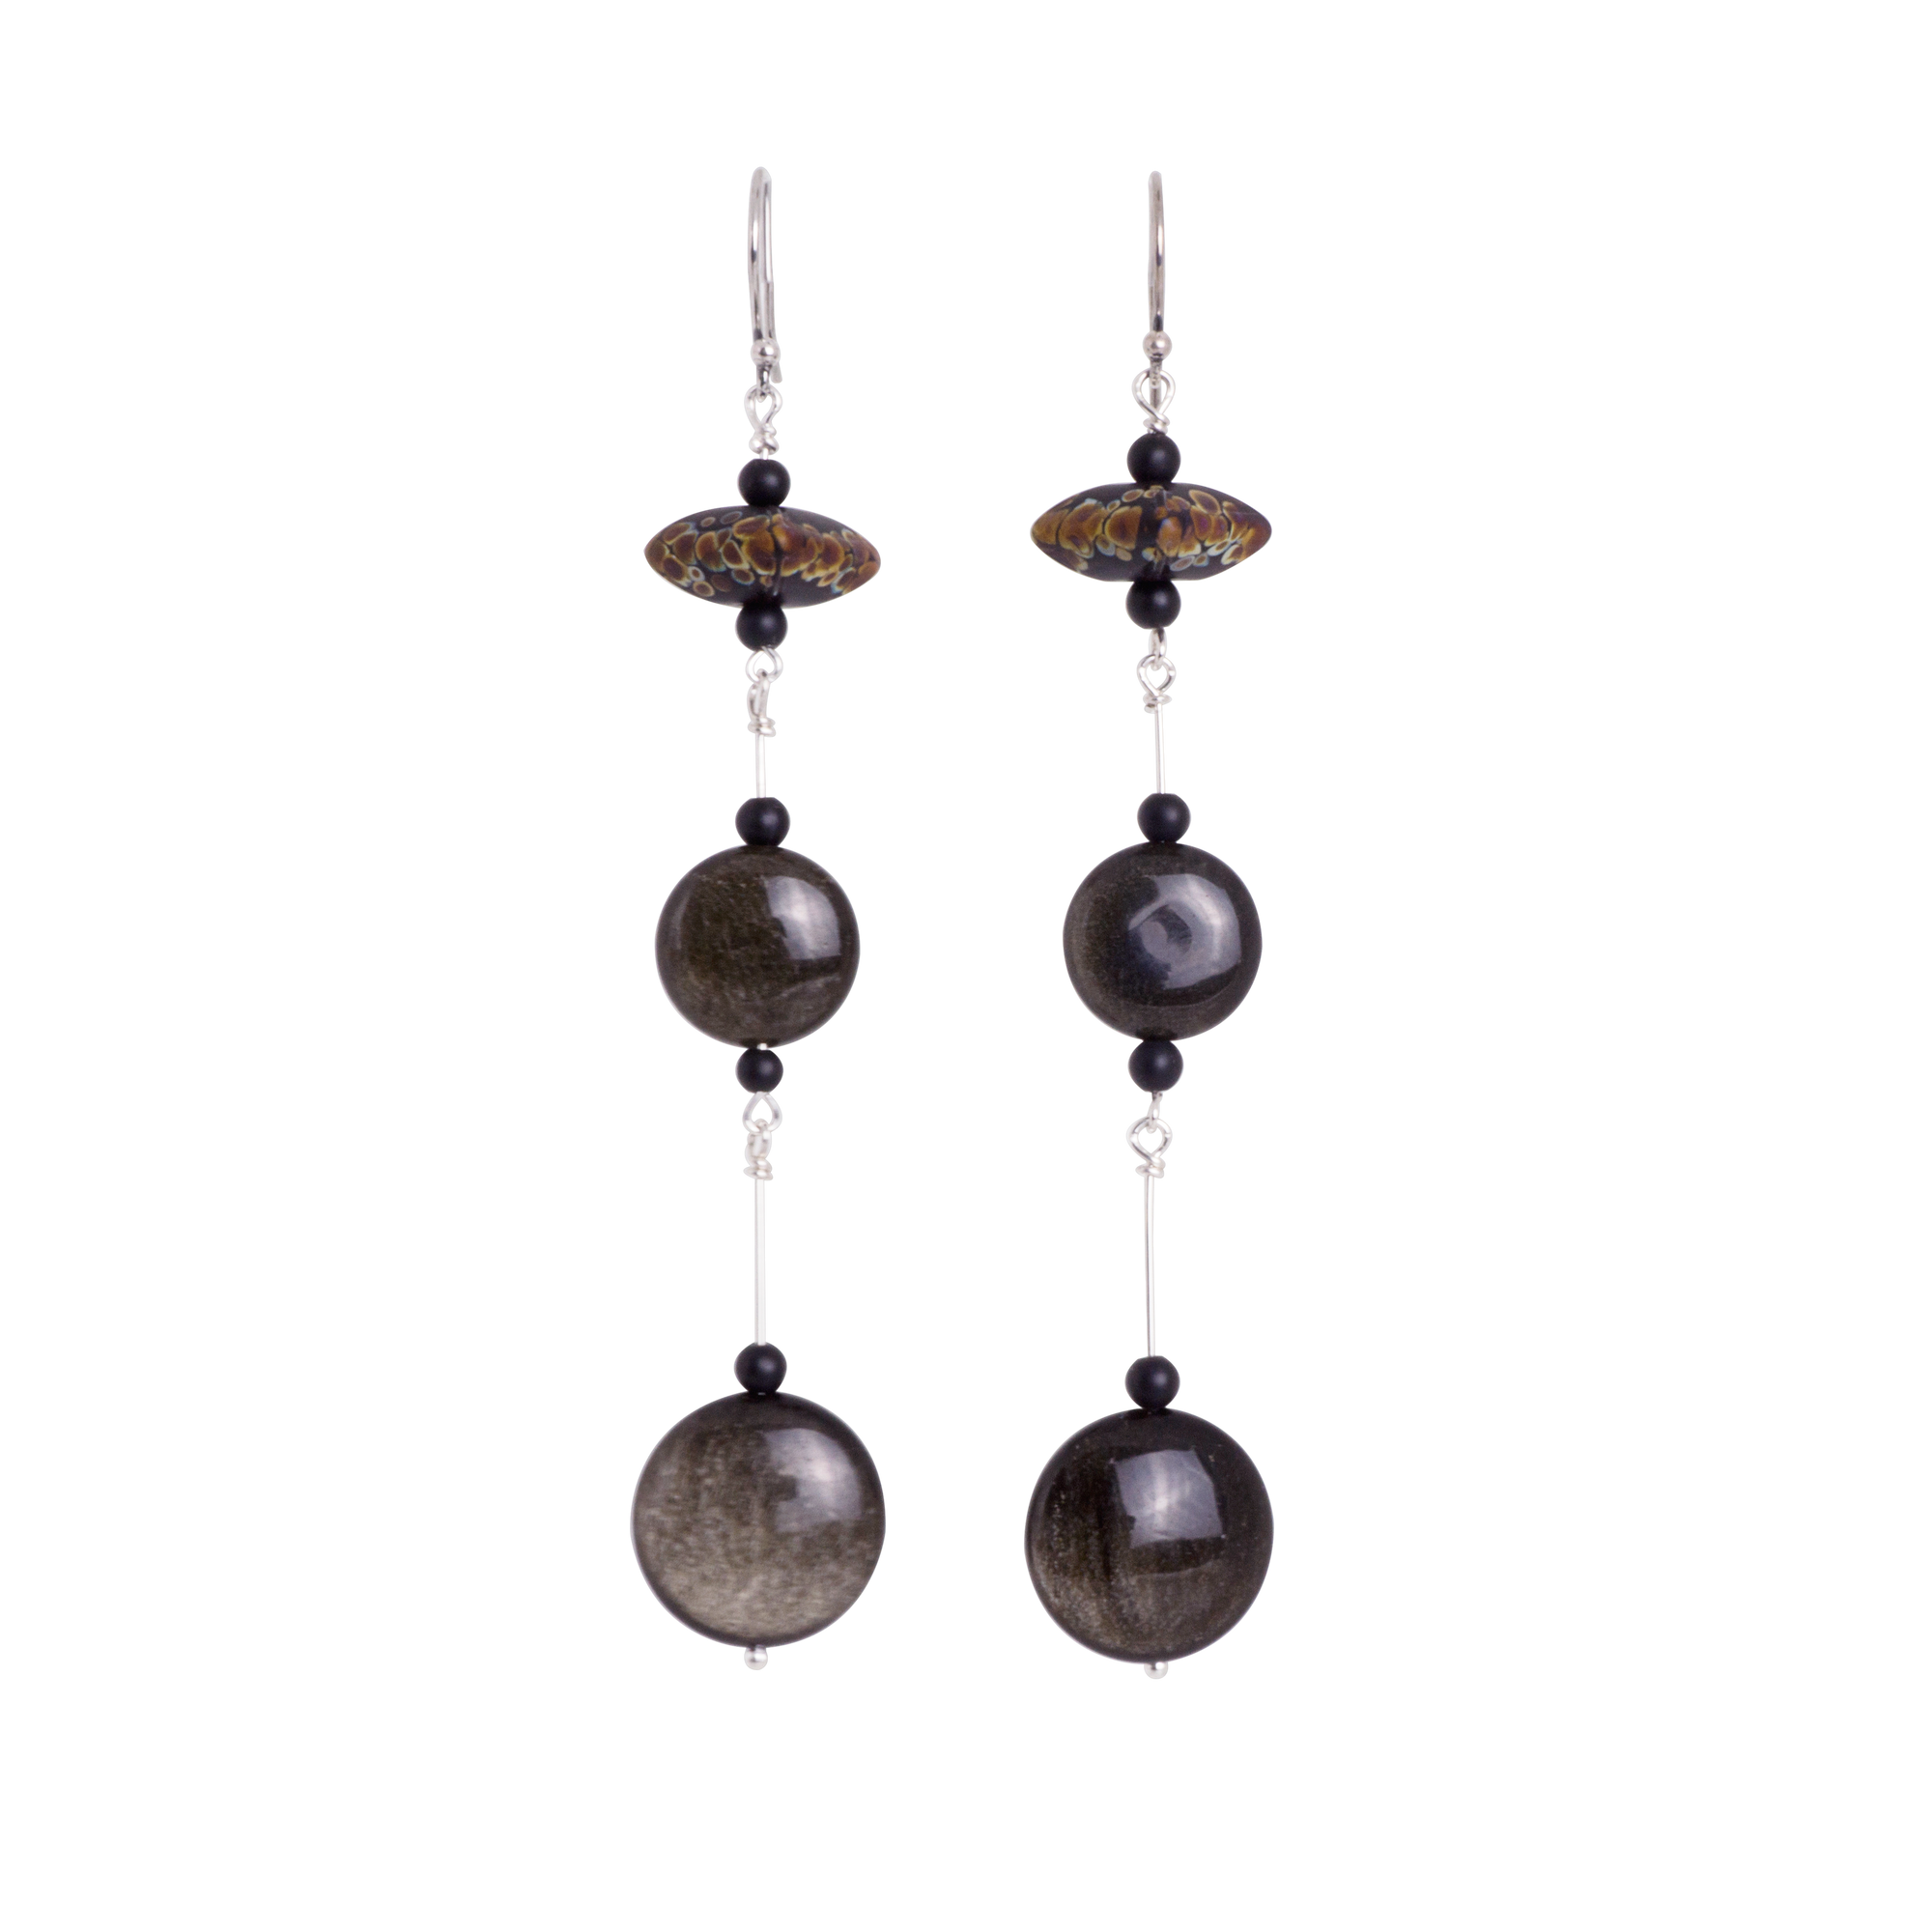 Obsidian and Art Glass Earrings: Long with Sterling Earwires